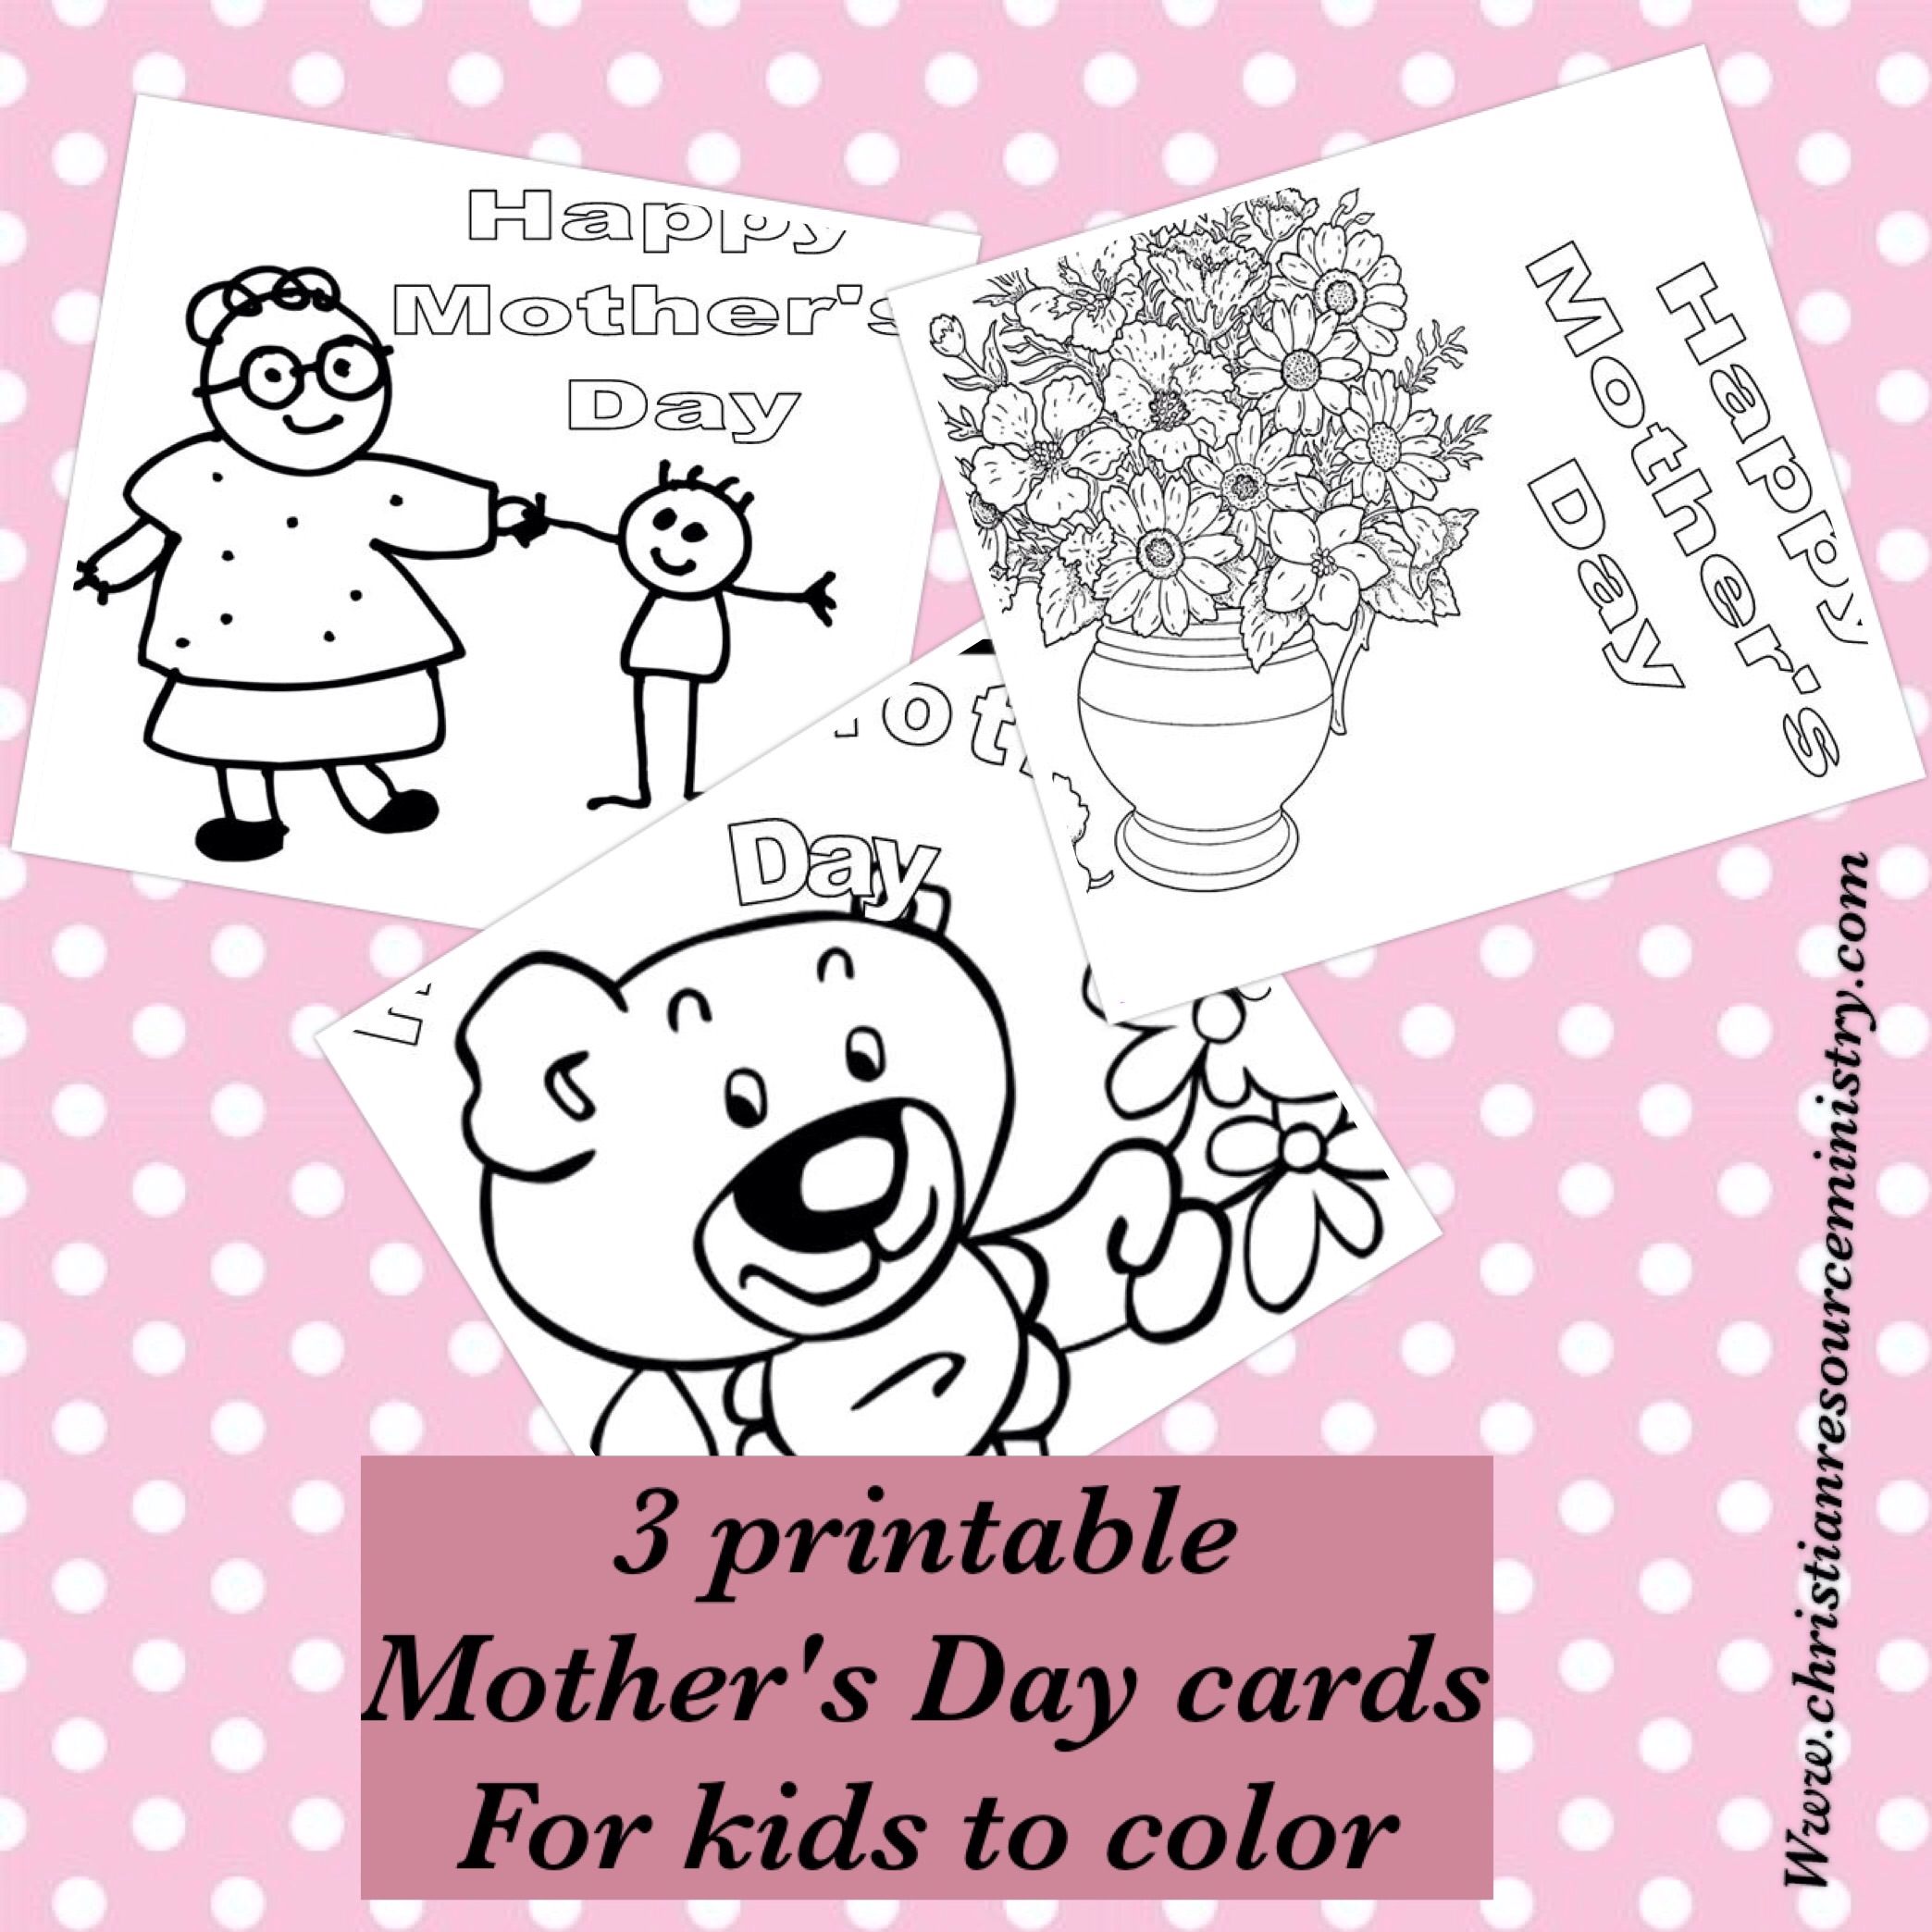 Printable Mother #39 s Day Cards for kids